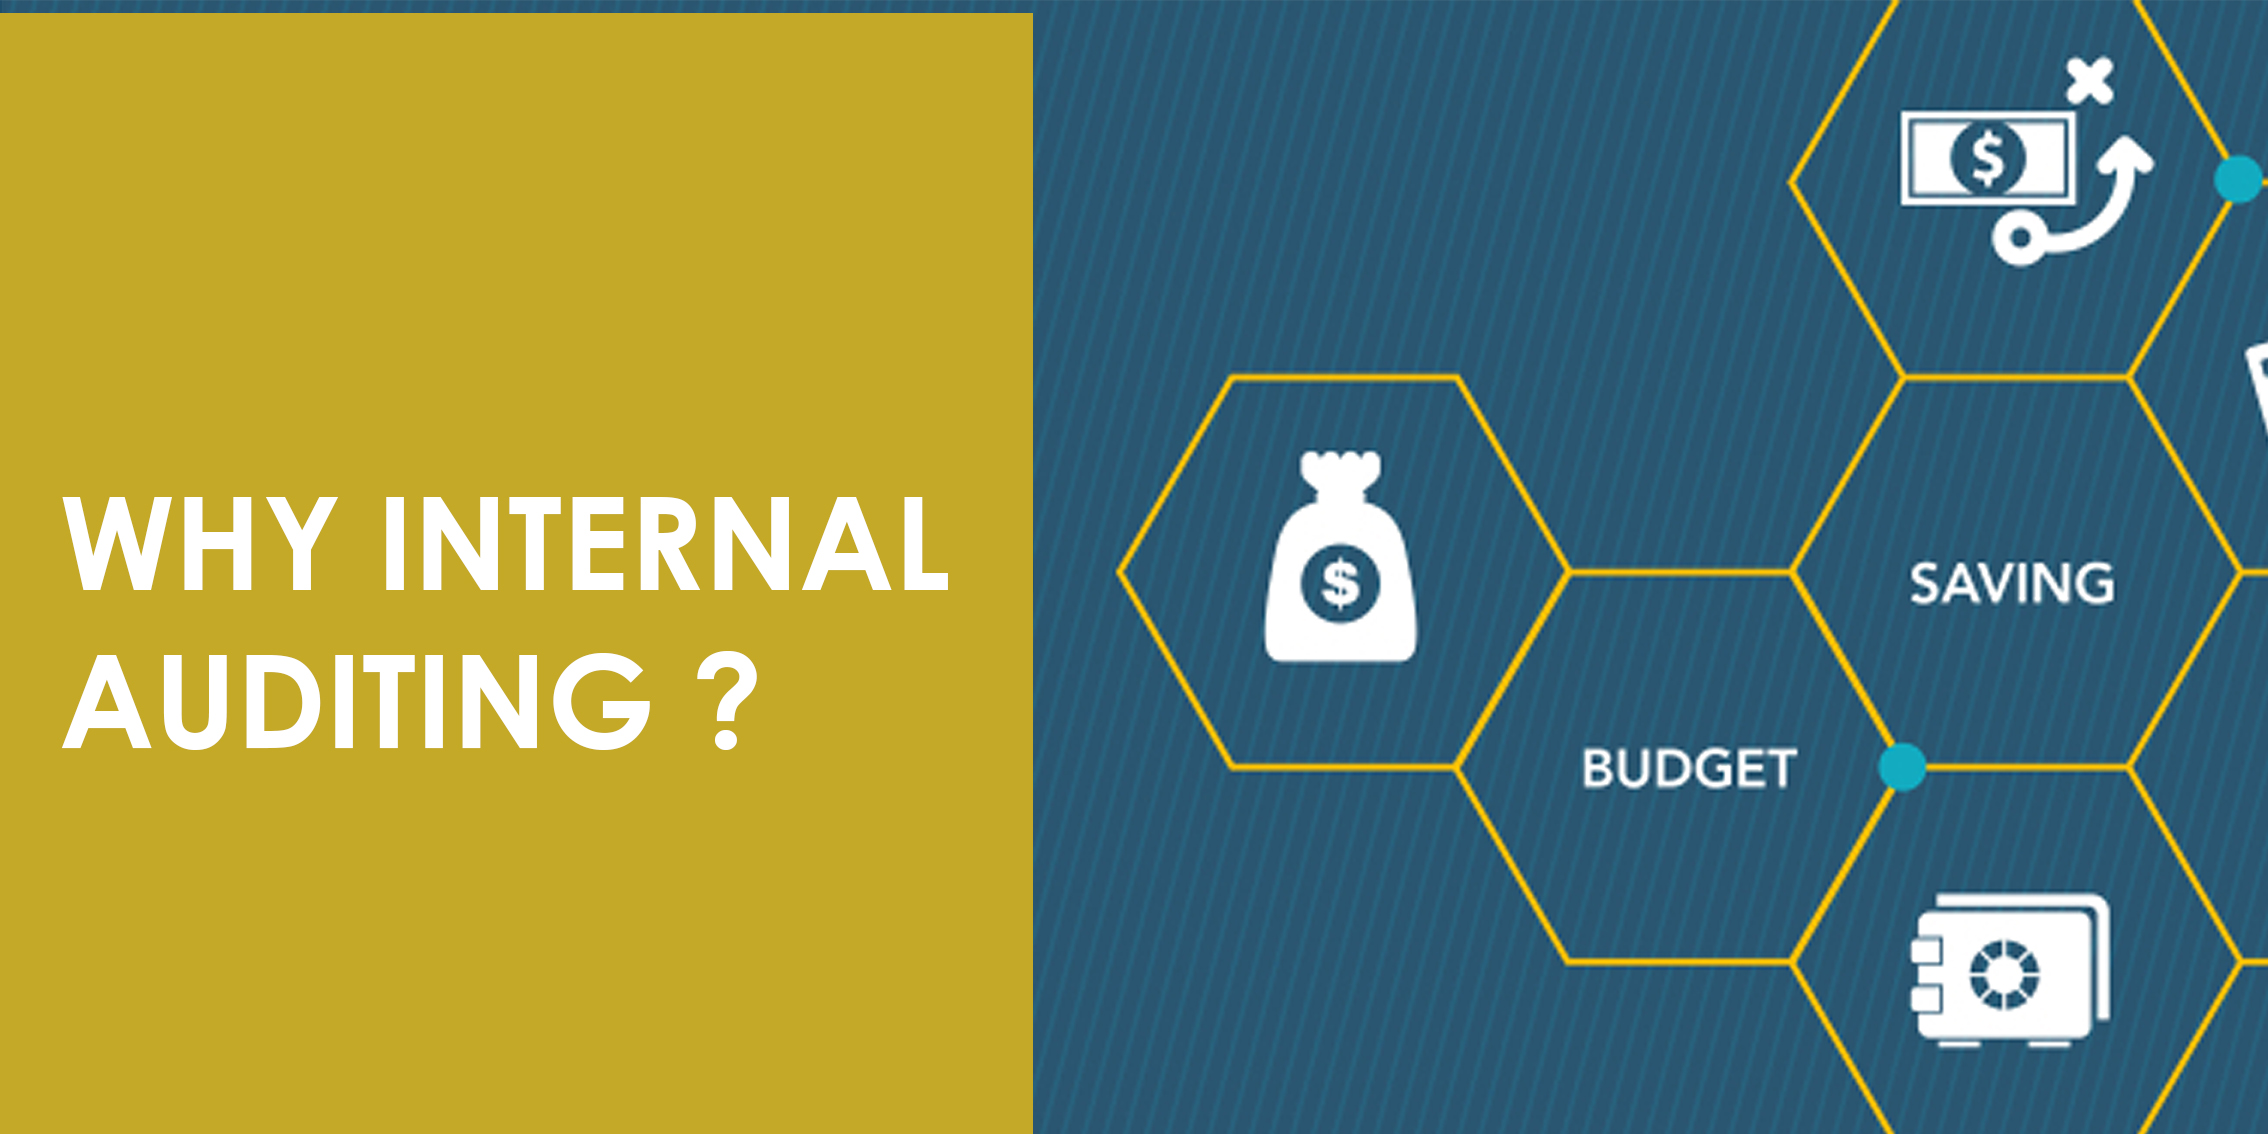 Why Internal Auditing ?